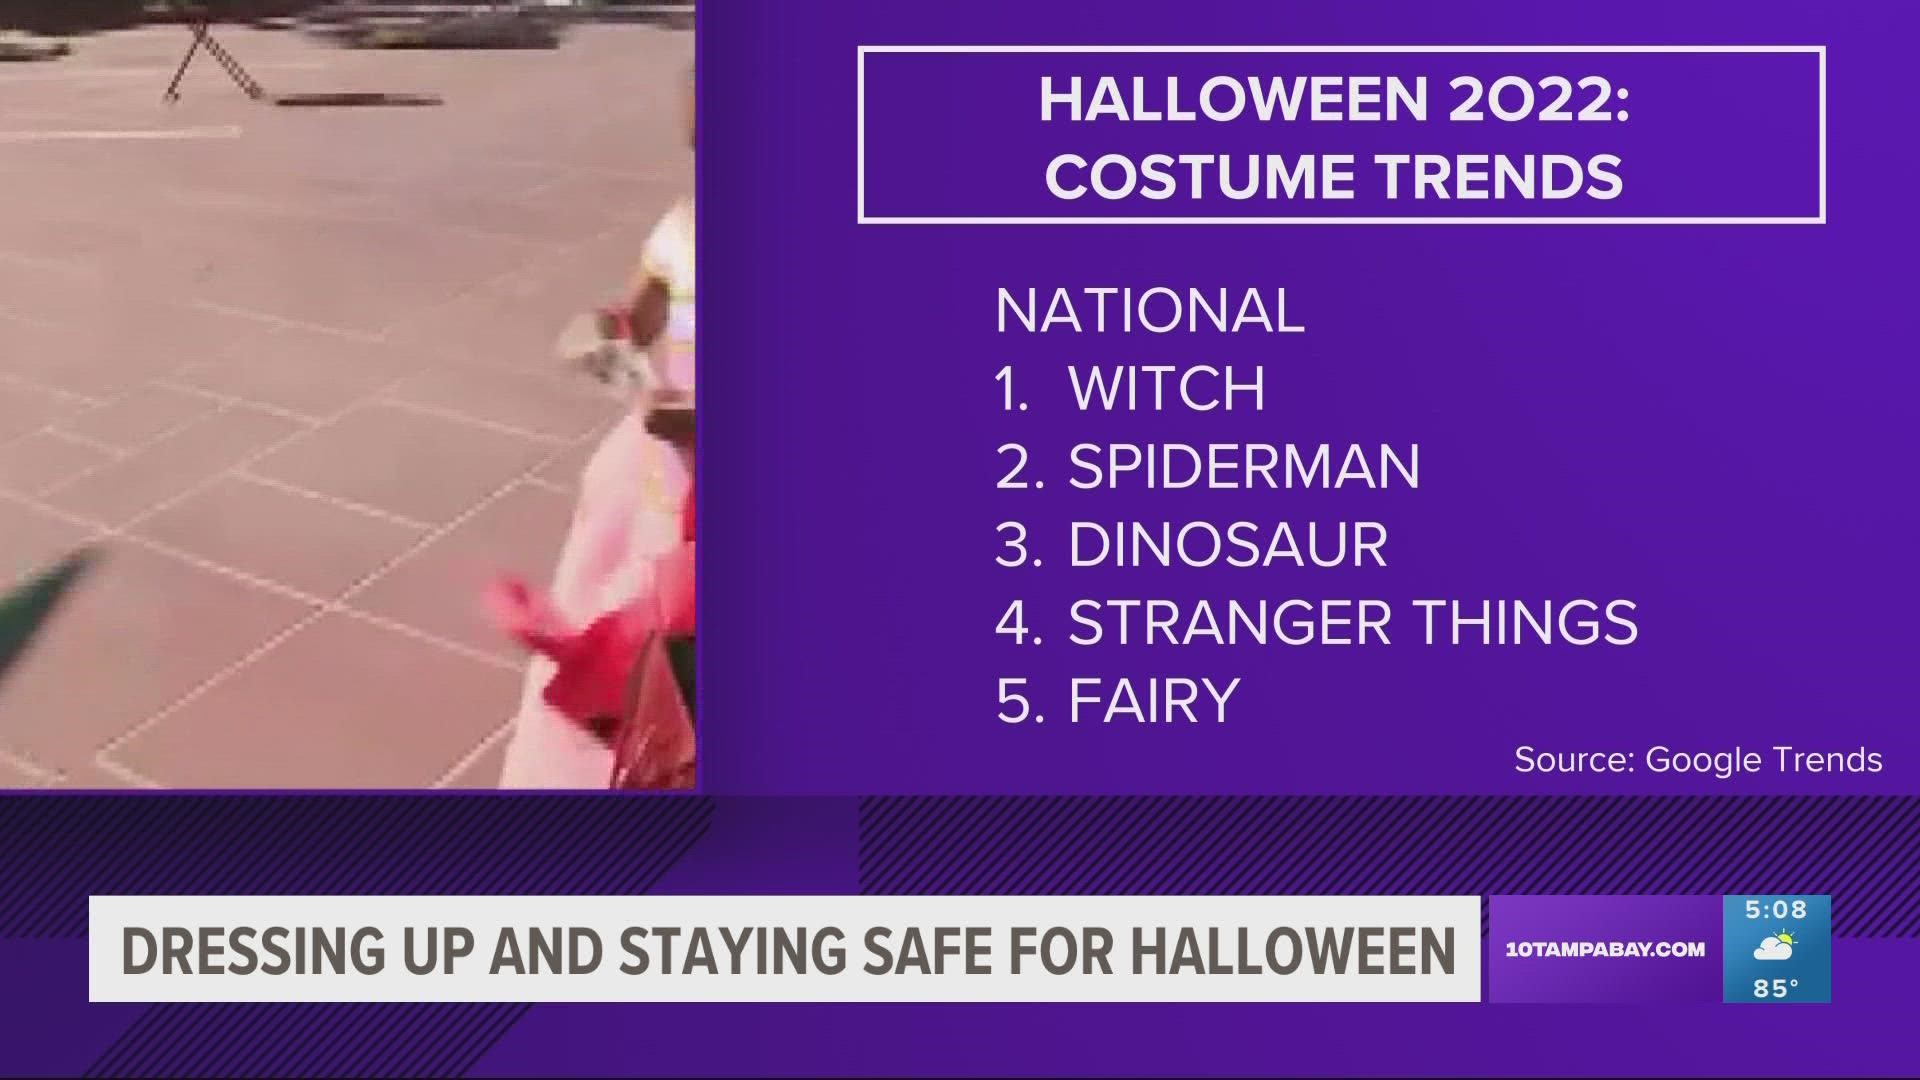 Whether you're collecting candy or giving out goodies, many people can expect to see kids dressed as monsters or princesses on Halloween.